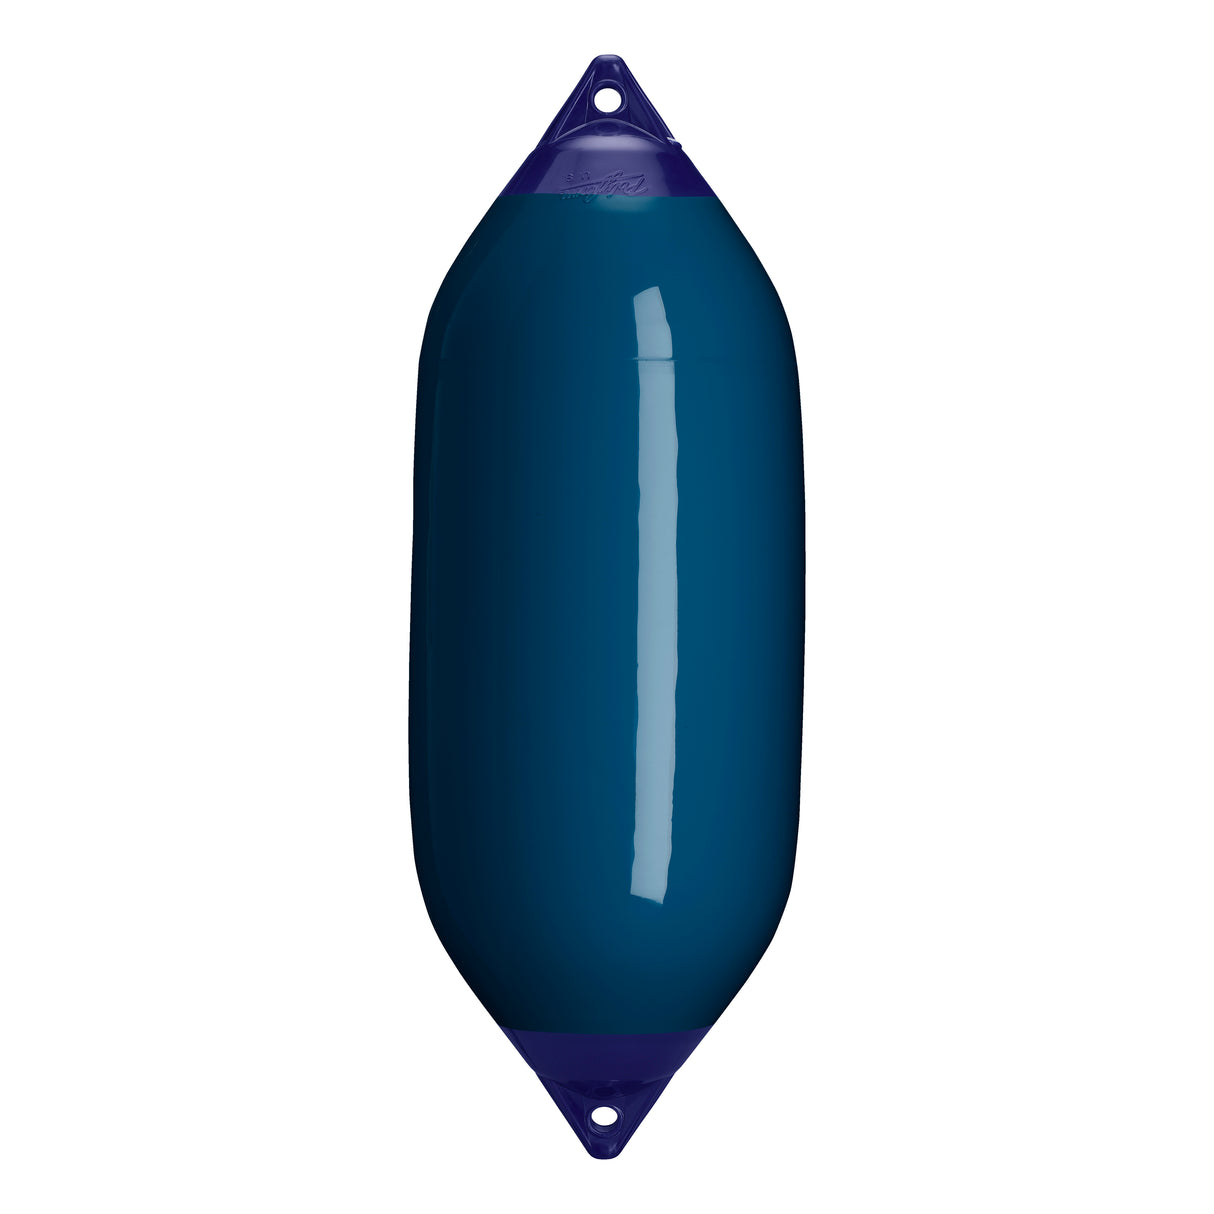 Catalina Blue boat fender with Navy-Top, Polyform F-7 